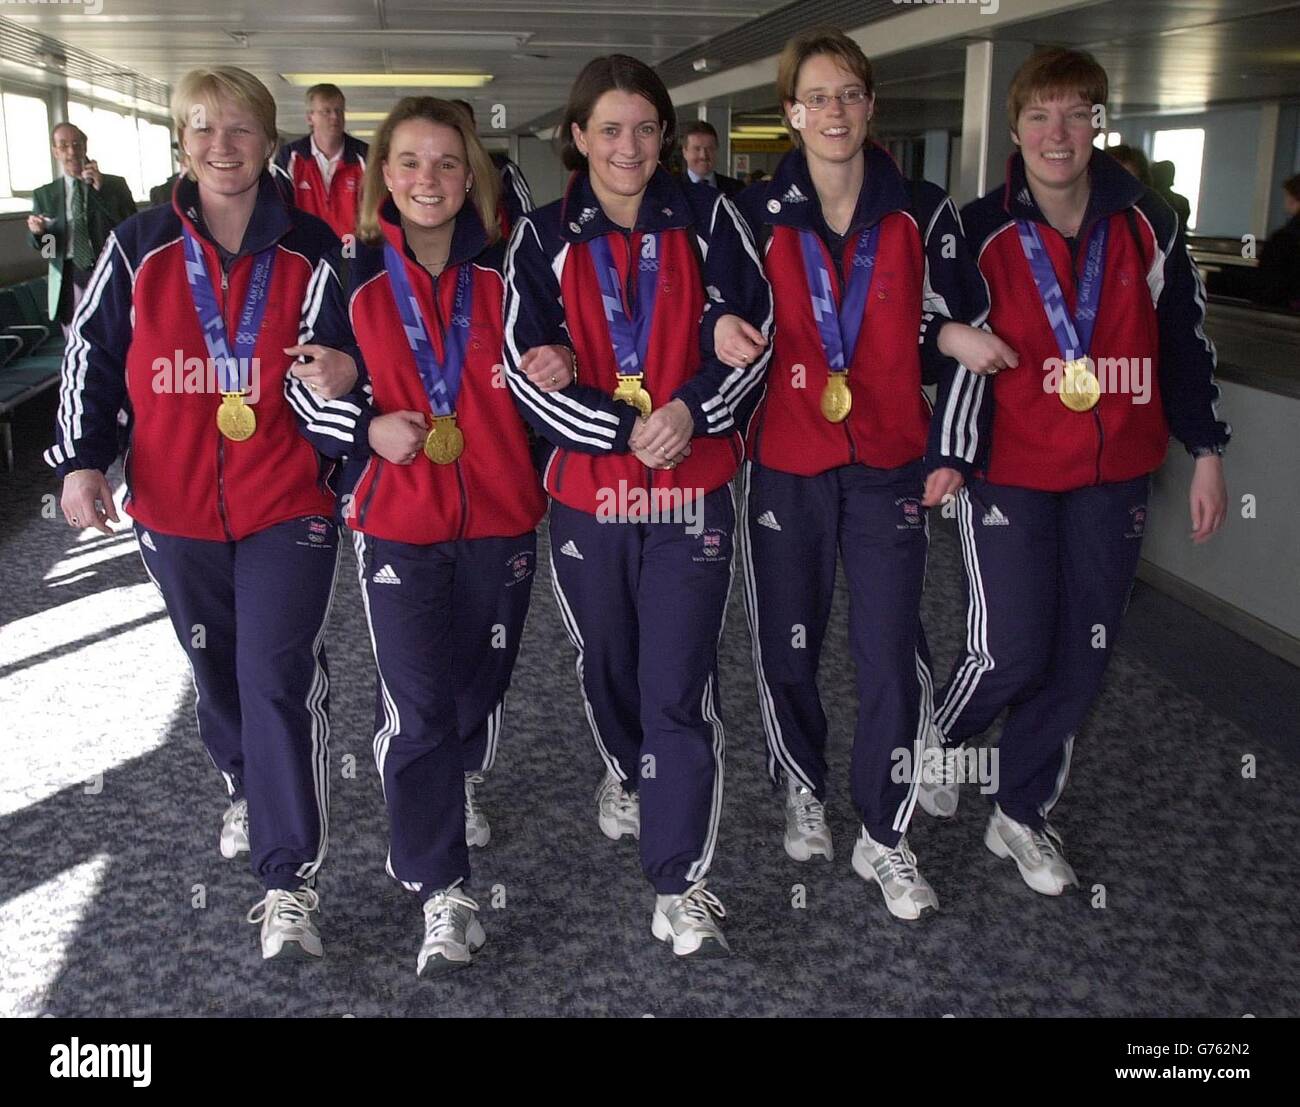 Great Britain's Curling team, Rhona Martin, Fiona Macdonald, Debbie Knox, Janice Rankin, Margaret Morton arrive at London's Heathrow Airport, holding the Gold Medals that they won during the Winter Olympics at Salt Lake City. Stock Photo